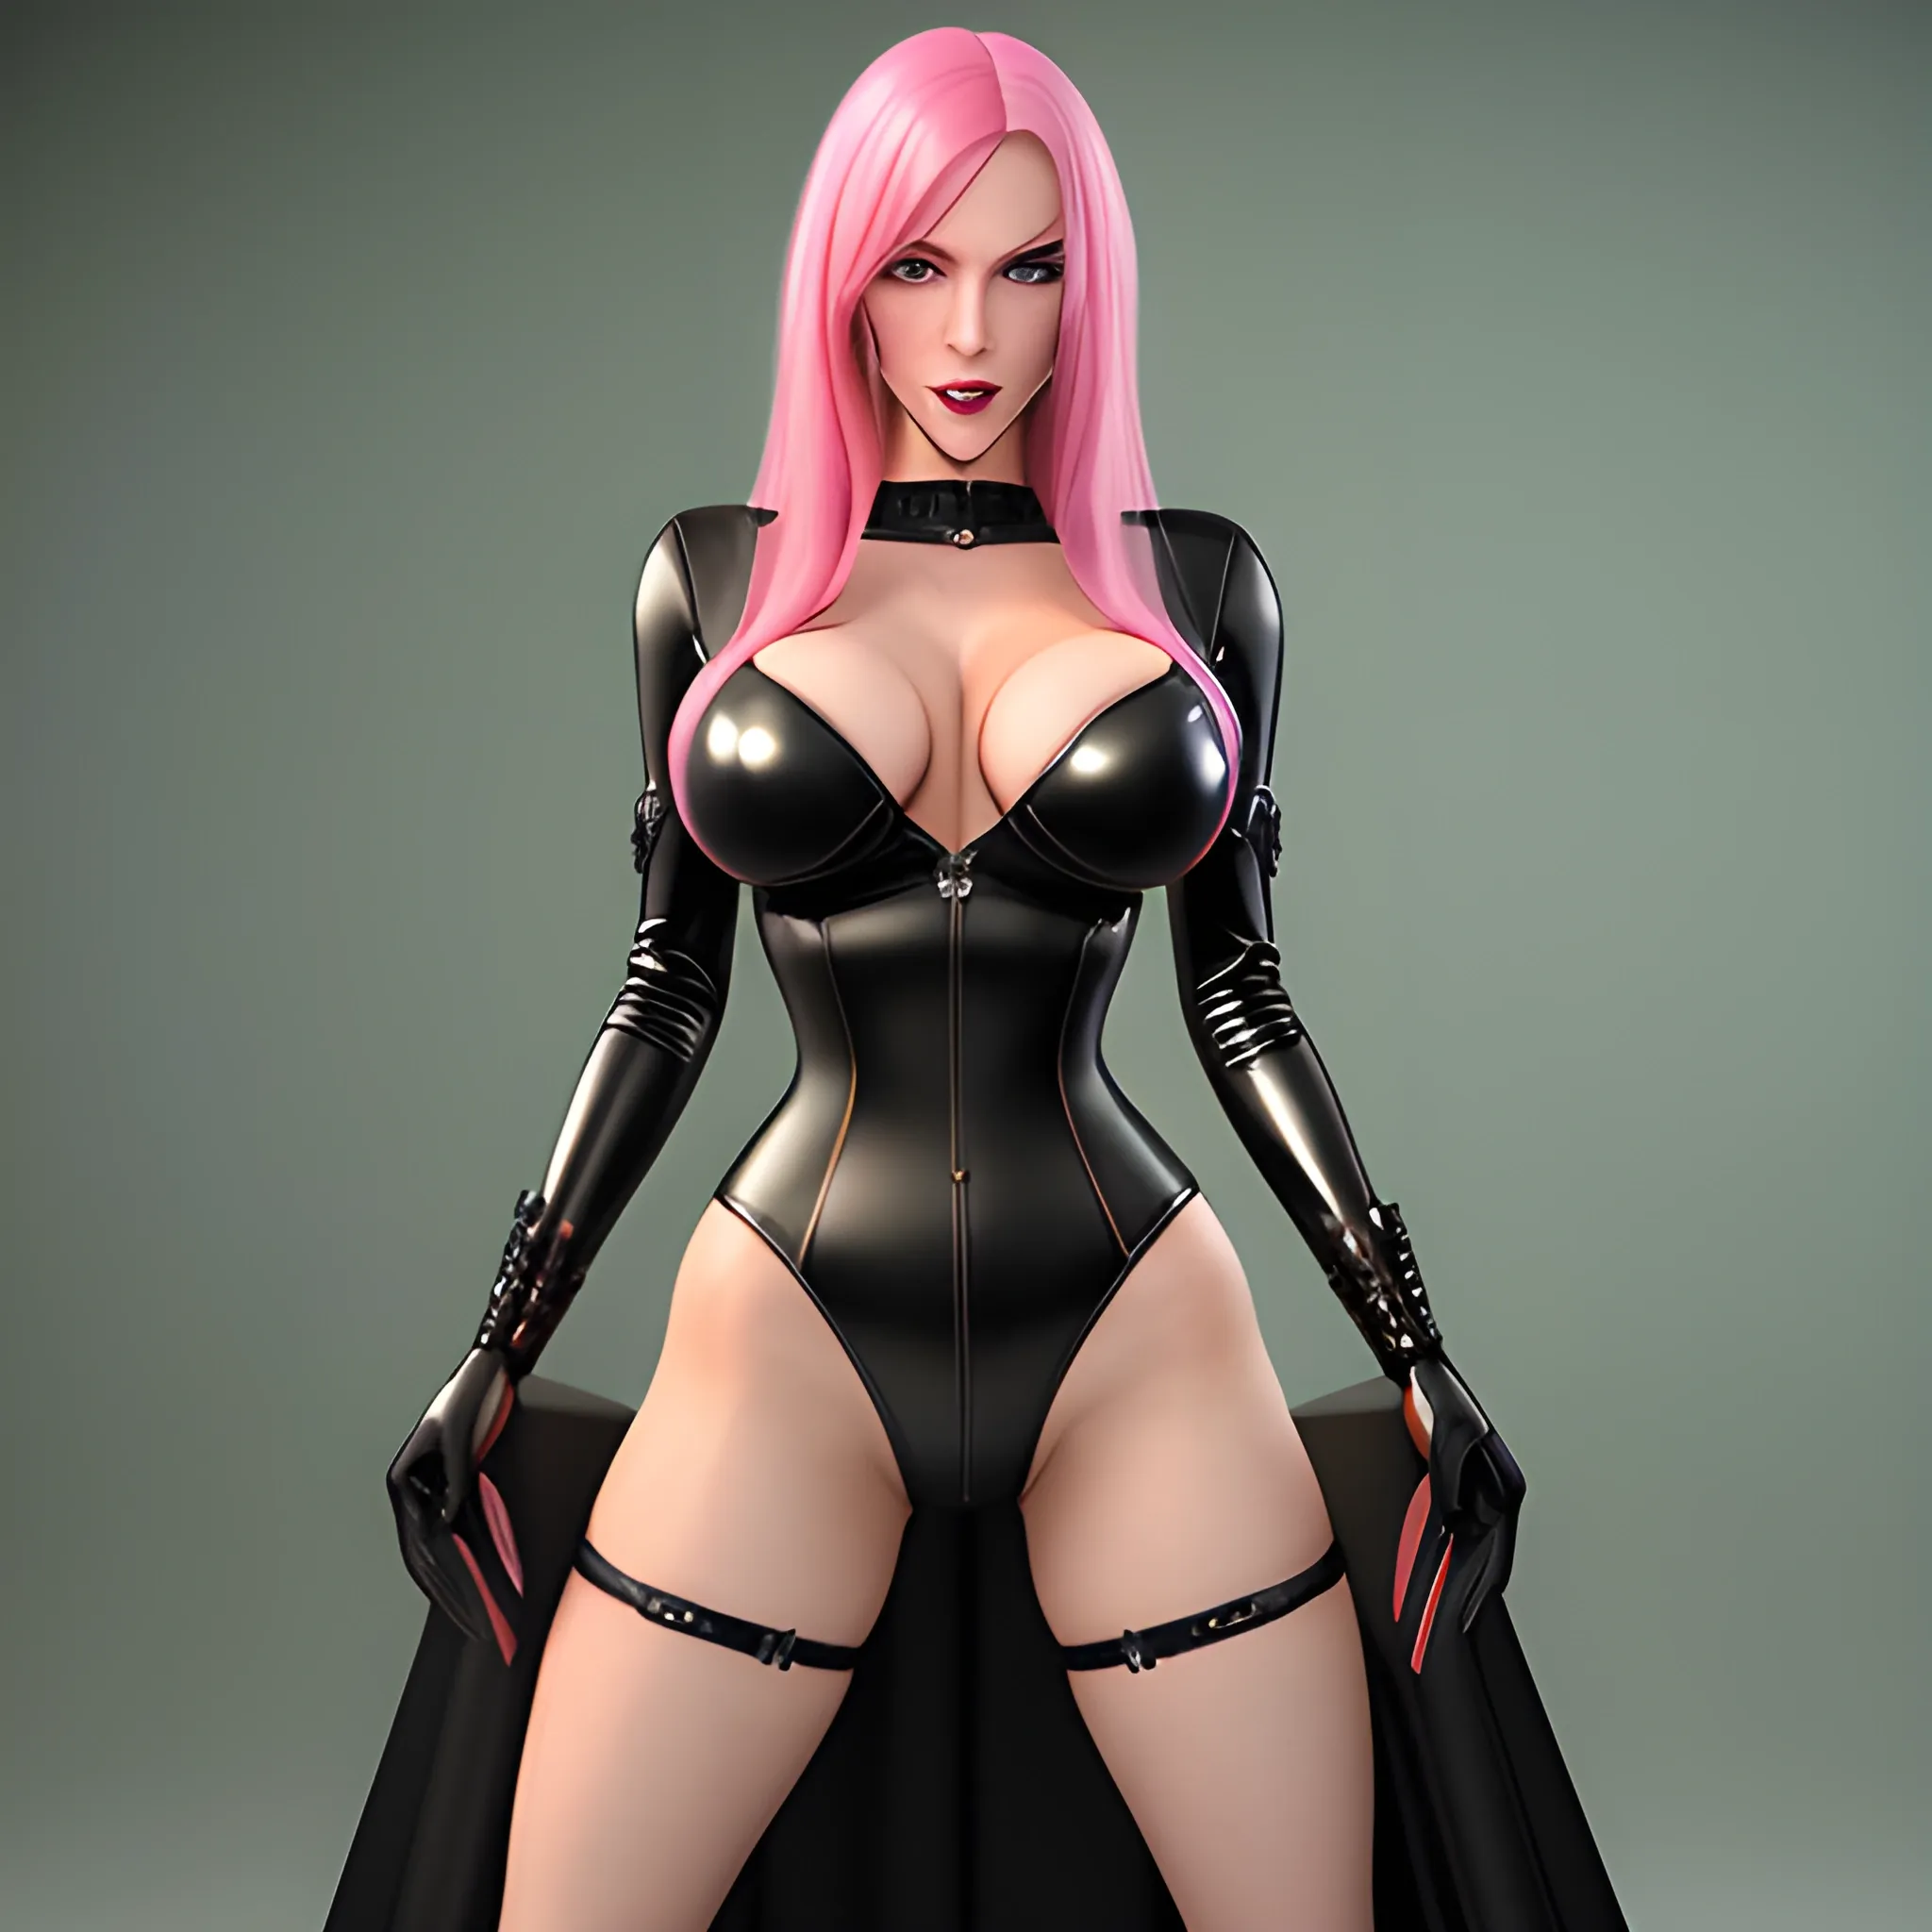 Create a photorealistic image of a cute young girl with long pink hair and light green eyes, she has small breasts, she is wearing a shiny dark medieval dress in latex and leather, breasts naked, breasts visible, pretty eyes, sweet mouth, whole body visible, highest level of detail